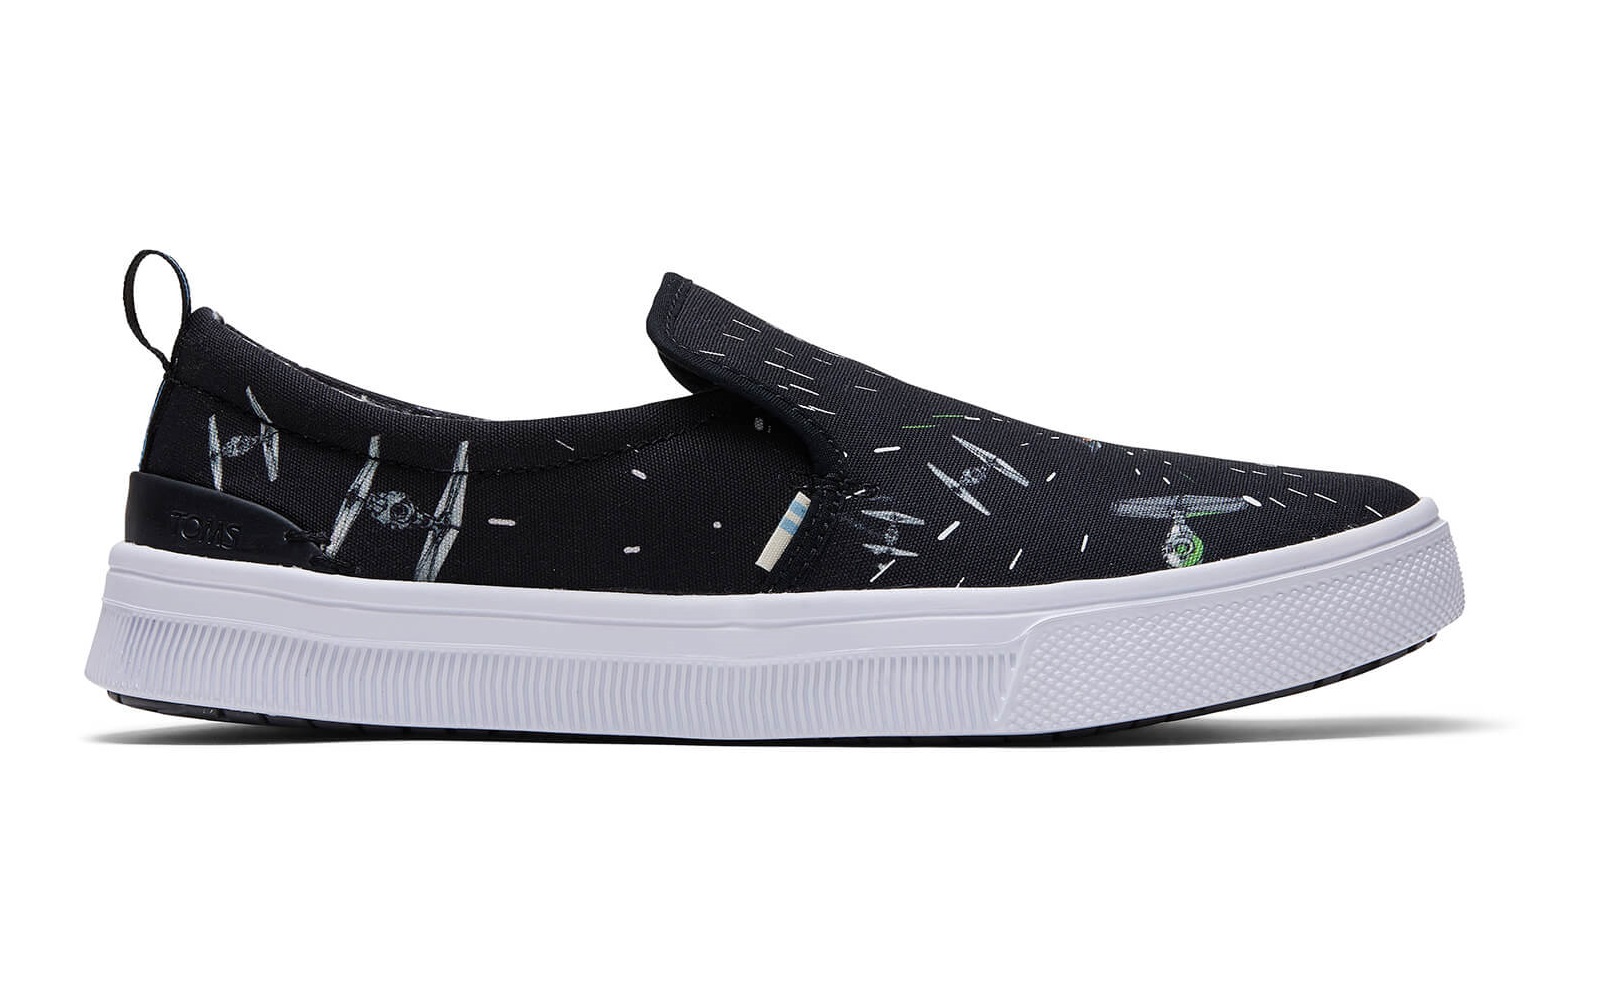 Toms x Star Wars Collection Launch! - The Kessel Runway